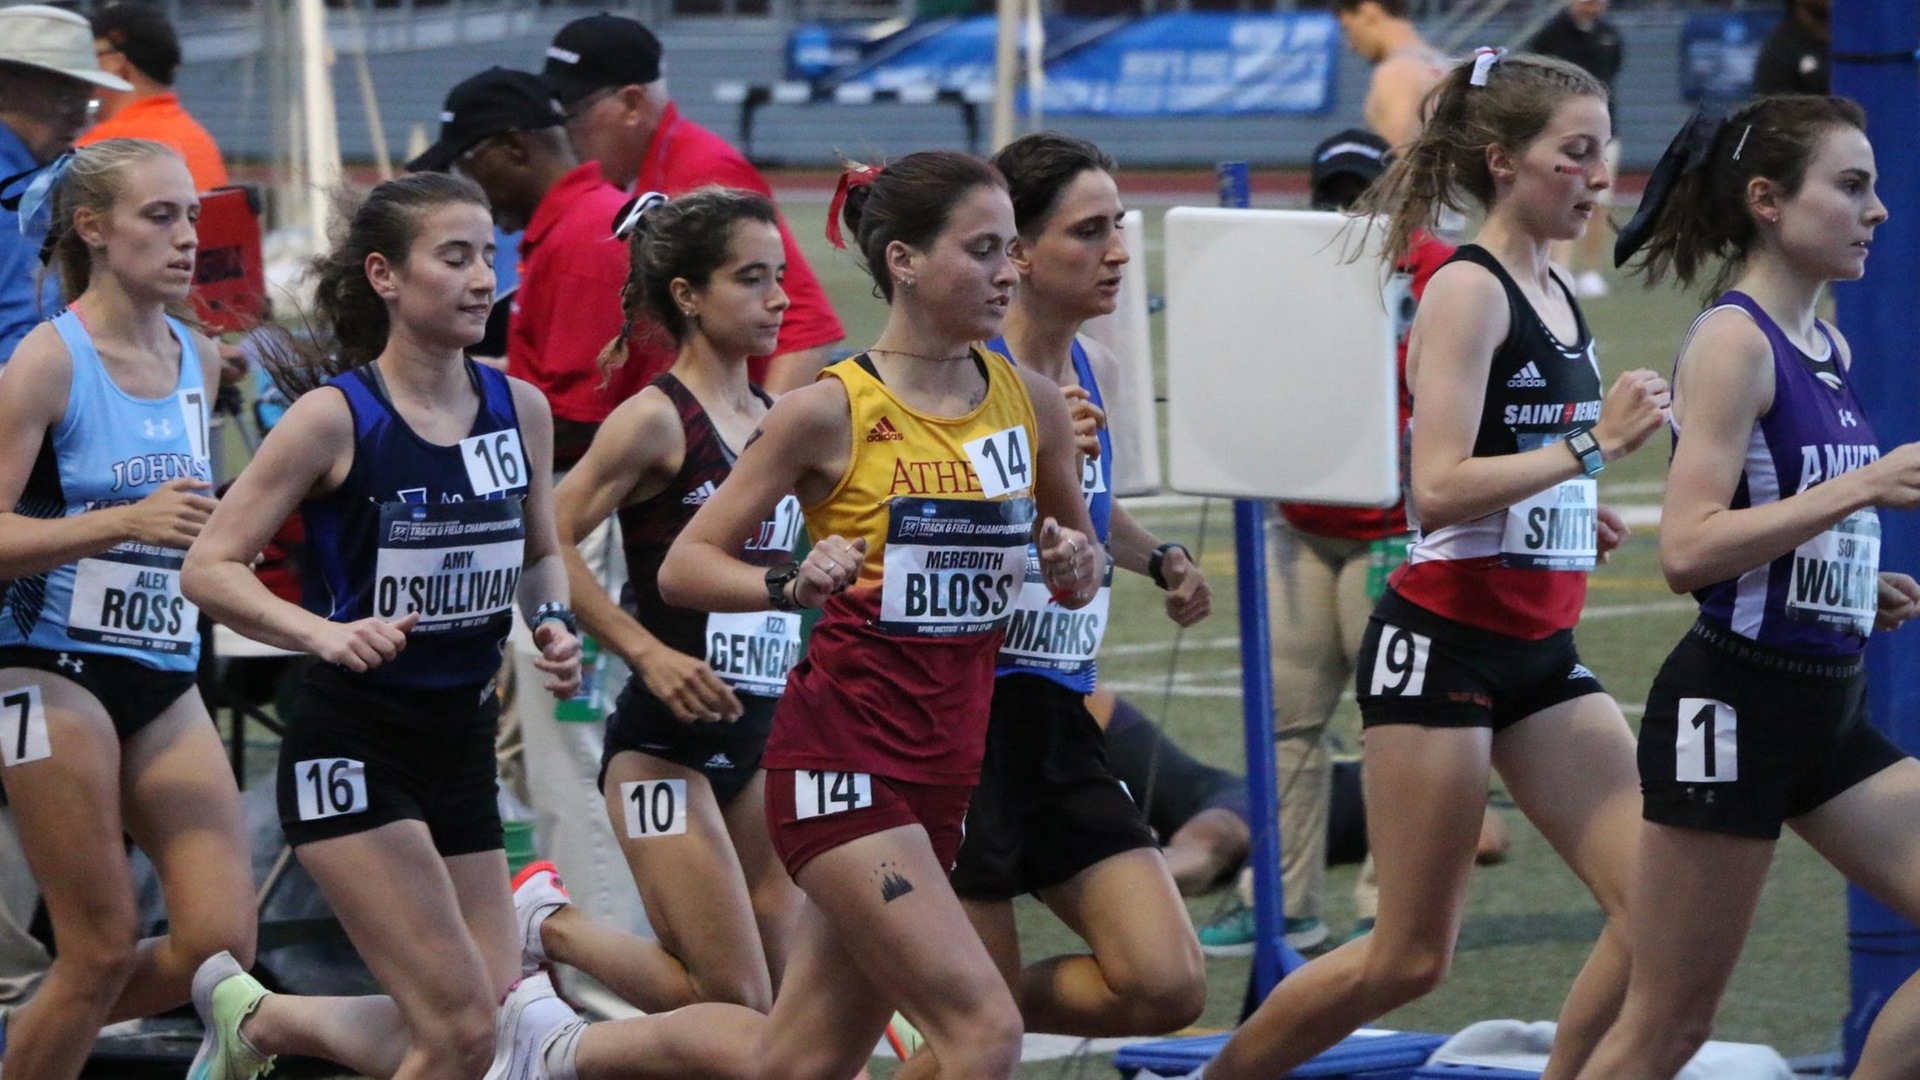 Meredith Bloss qualified for the NCAAs in all three seasons